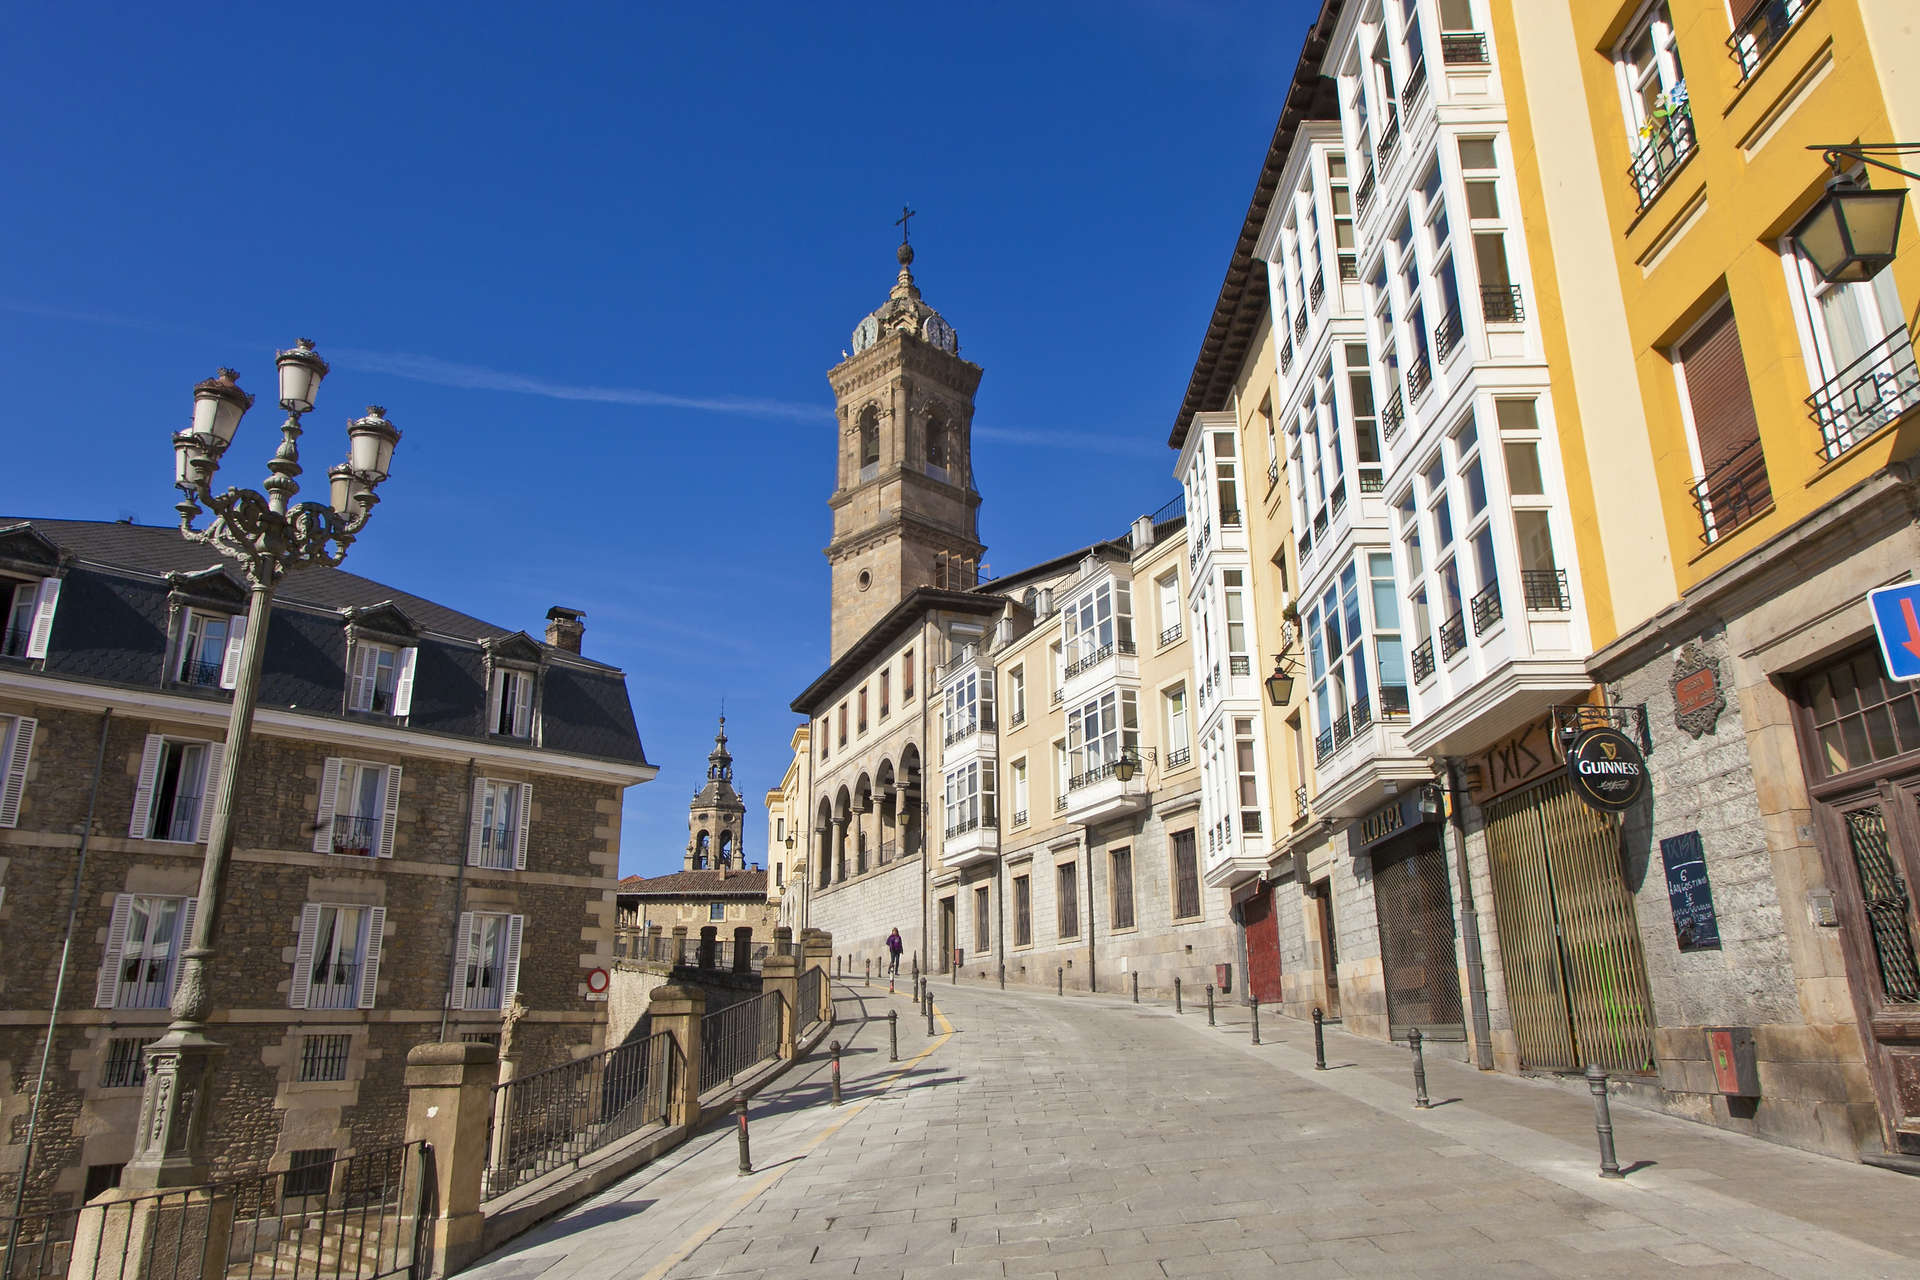 Vitoria-Gasteiz is the capital of the Basque Country